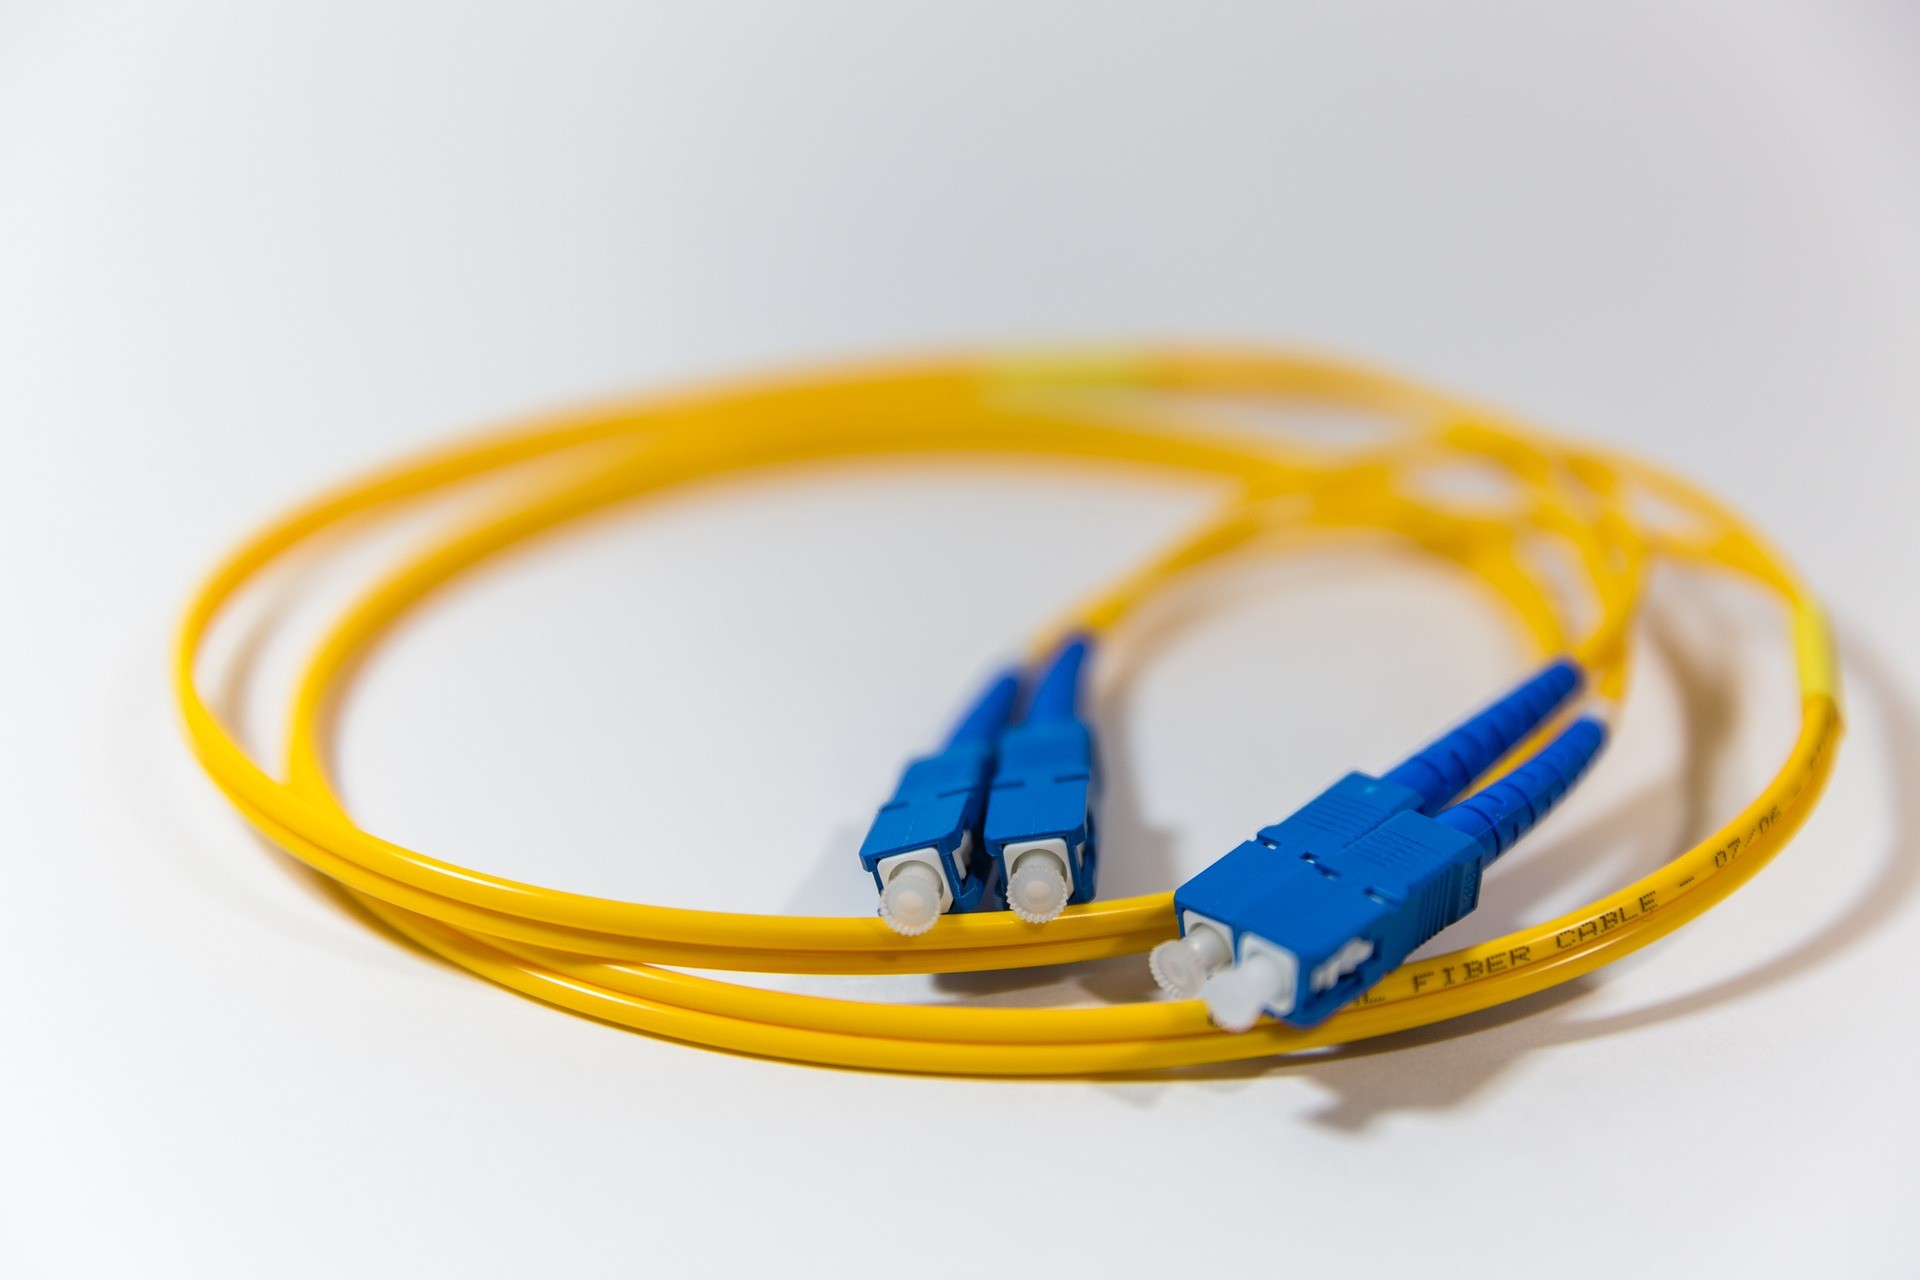 The Essential Guide to Fiber Optic Cabling: Standards and Installation